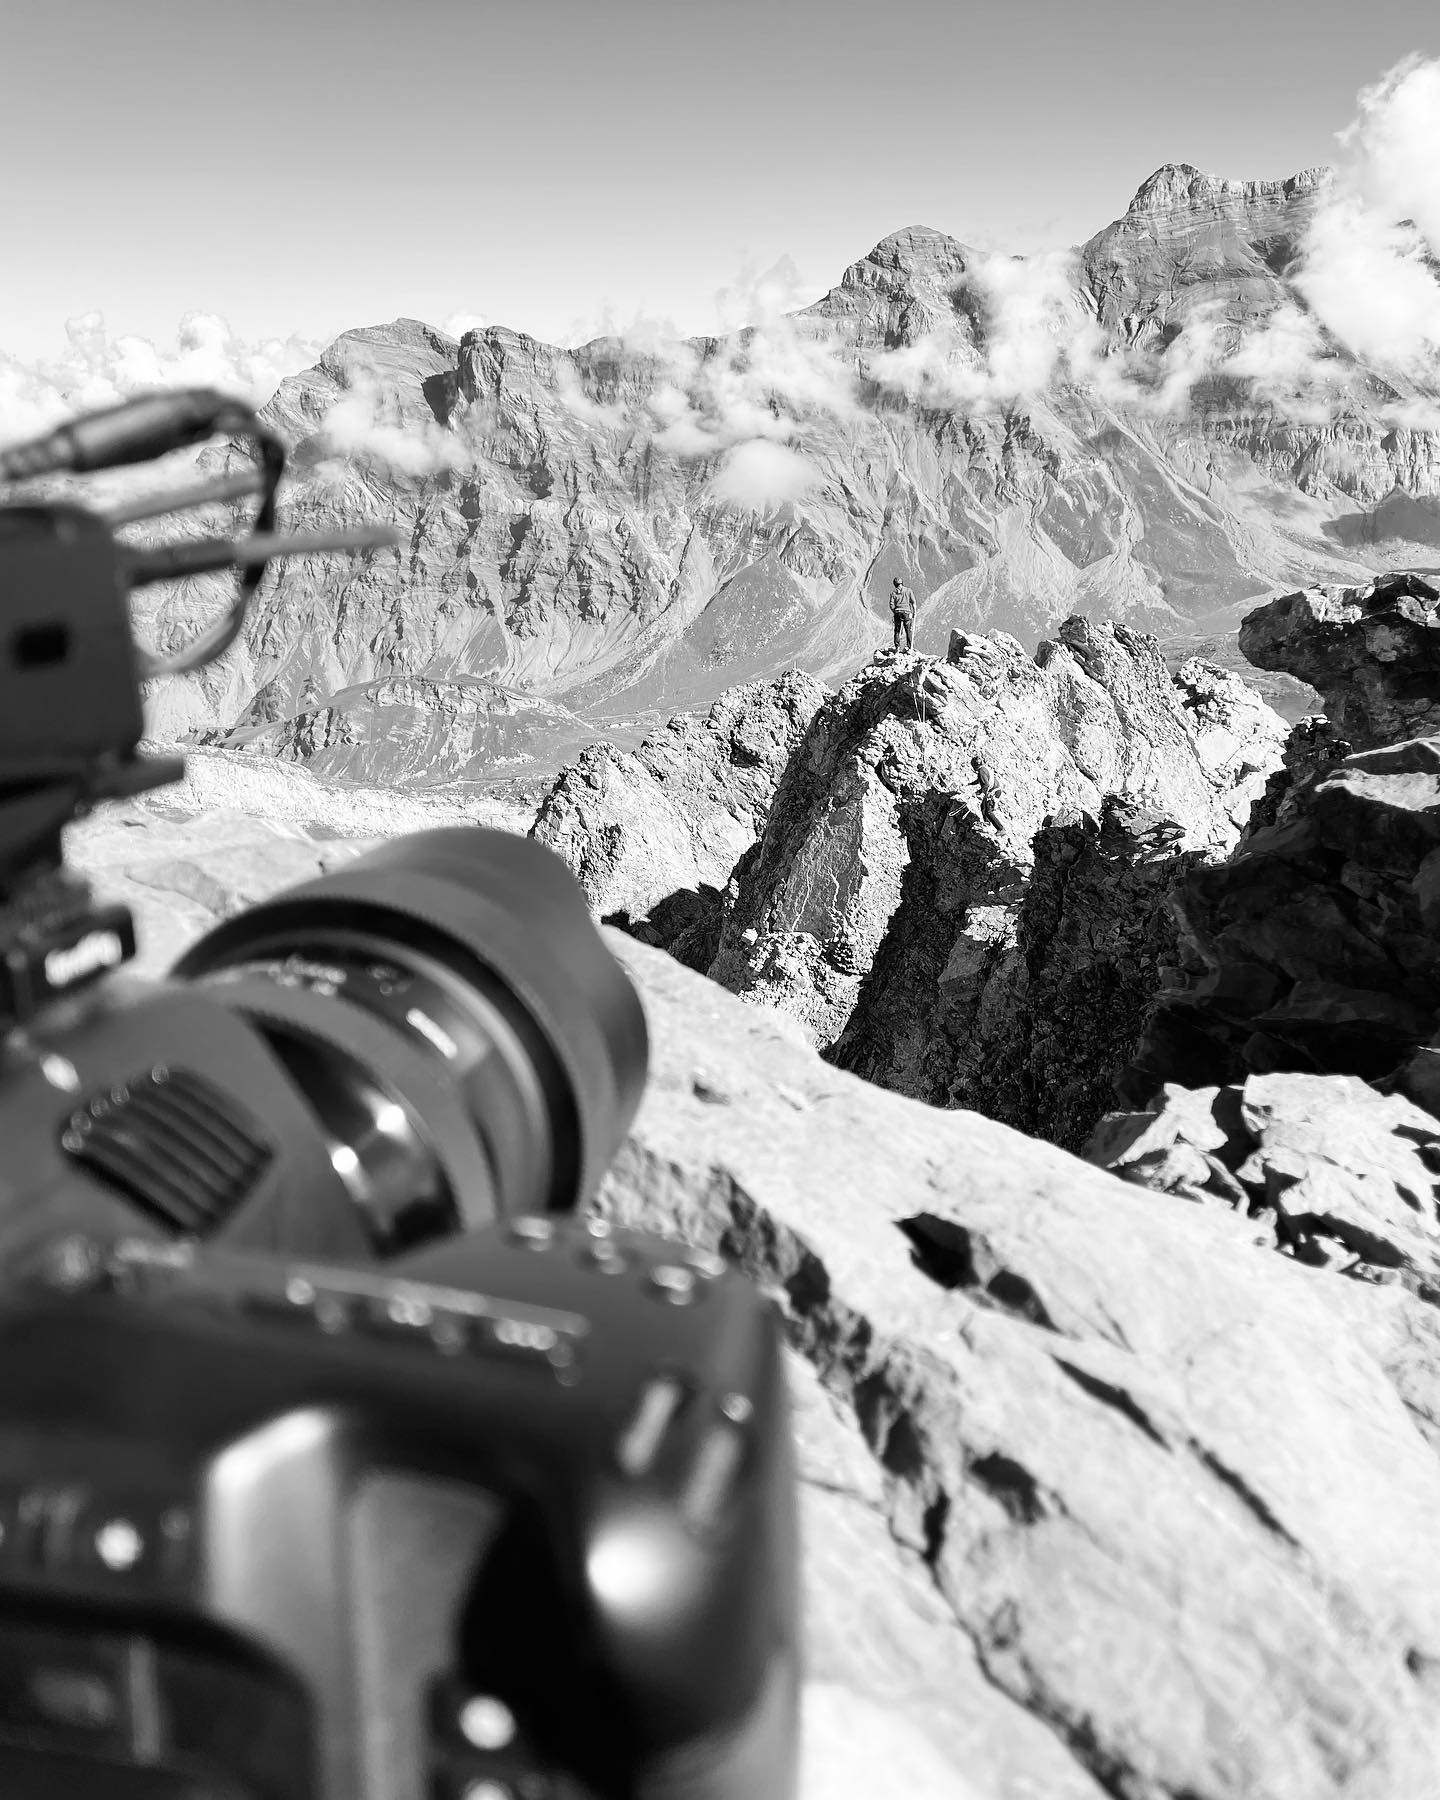 ||MOUNTAIN SHOOTING||
A really good spirit today, we are in the mountains, the view is magnificent and we are going to film Wingsuit base jumping! What’s else? :) 
#mountainshooting #5elementsproduction #wingsuiting #wingsuit #bestjobever